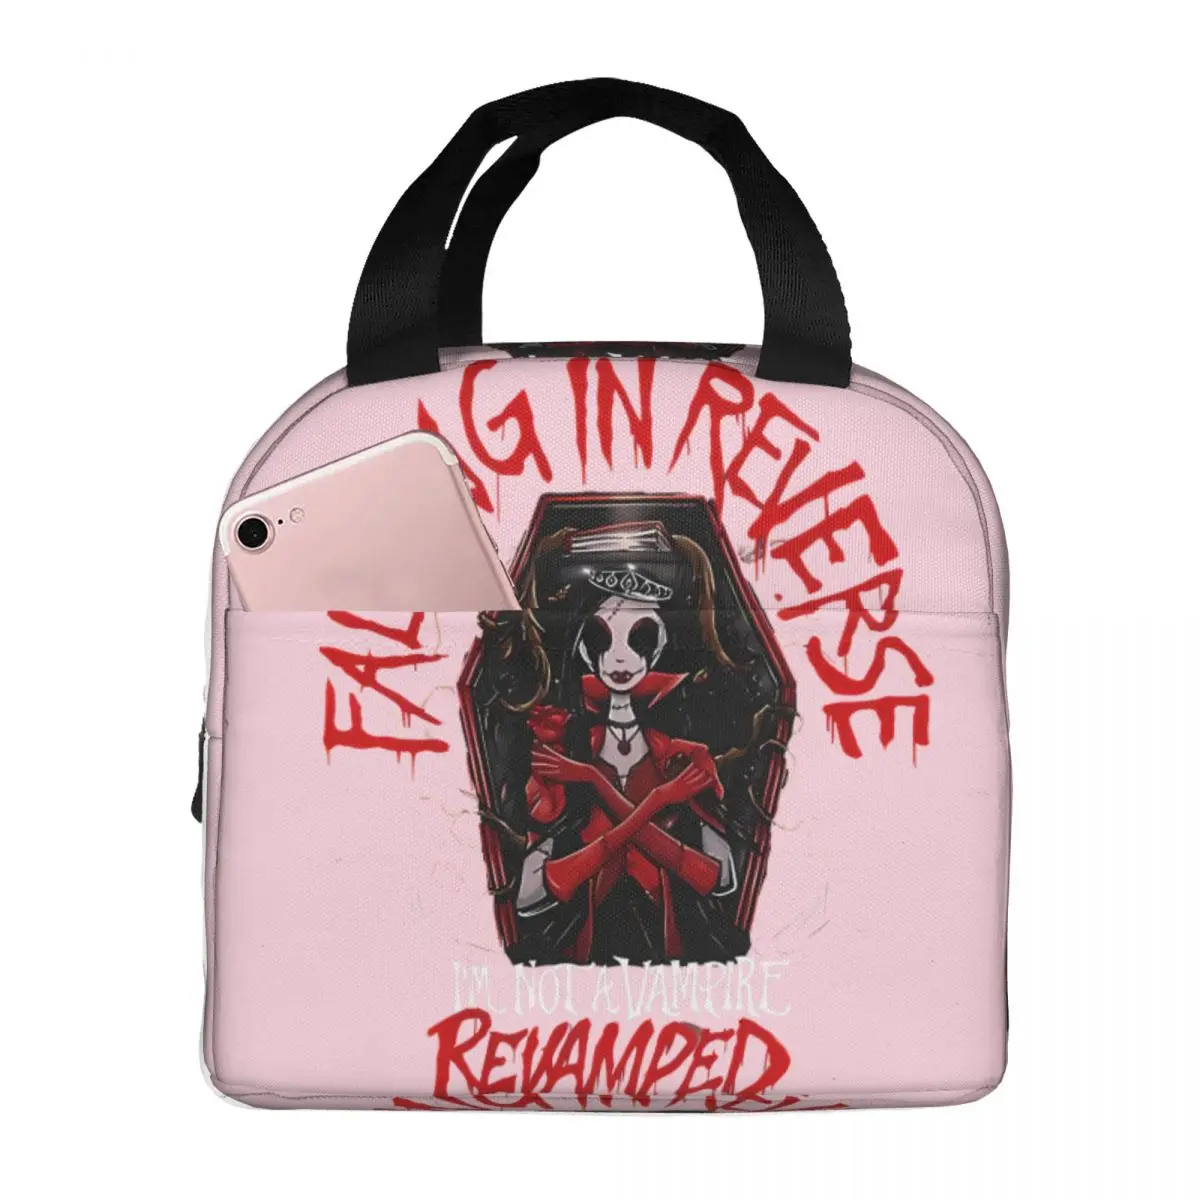 Leakproof Insulated For Girls Falling In Reverse Lunch Container New Arrival Best Seller Artwork Travel Storage Bag